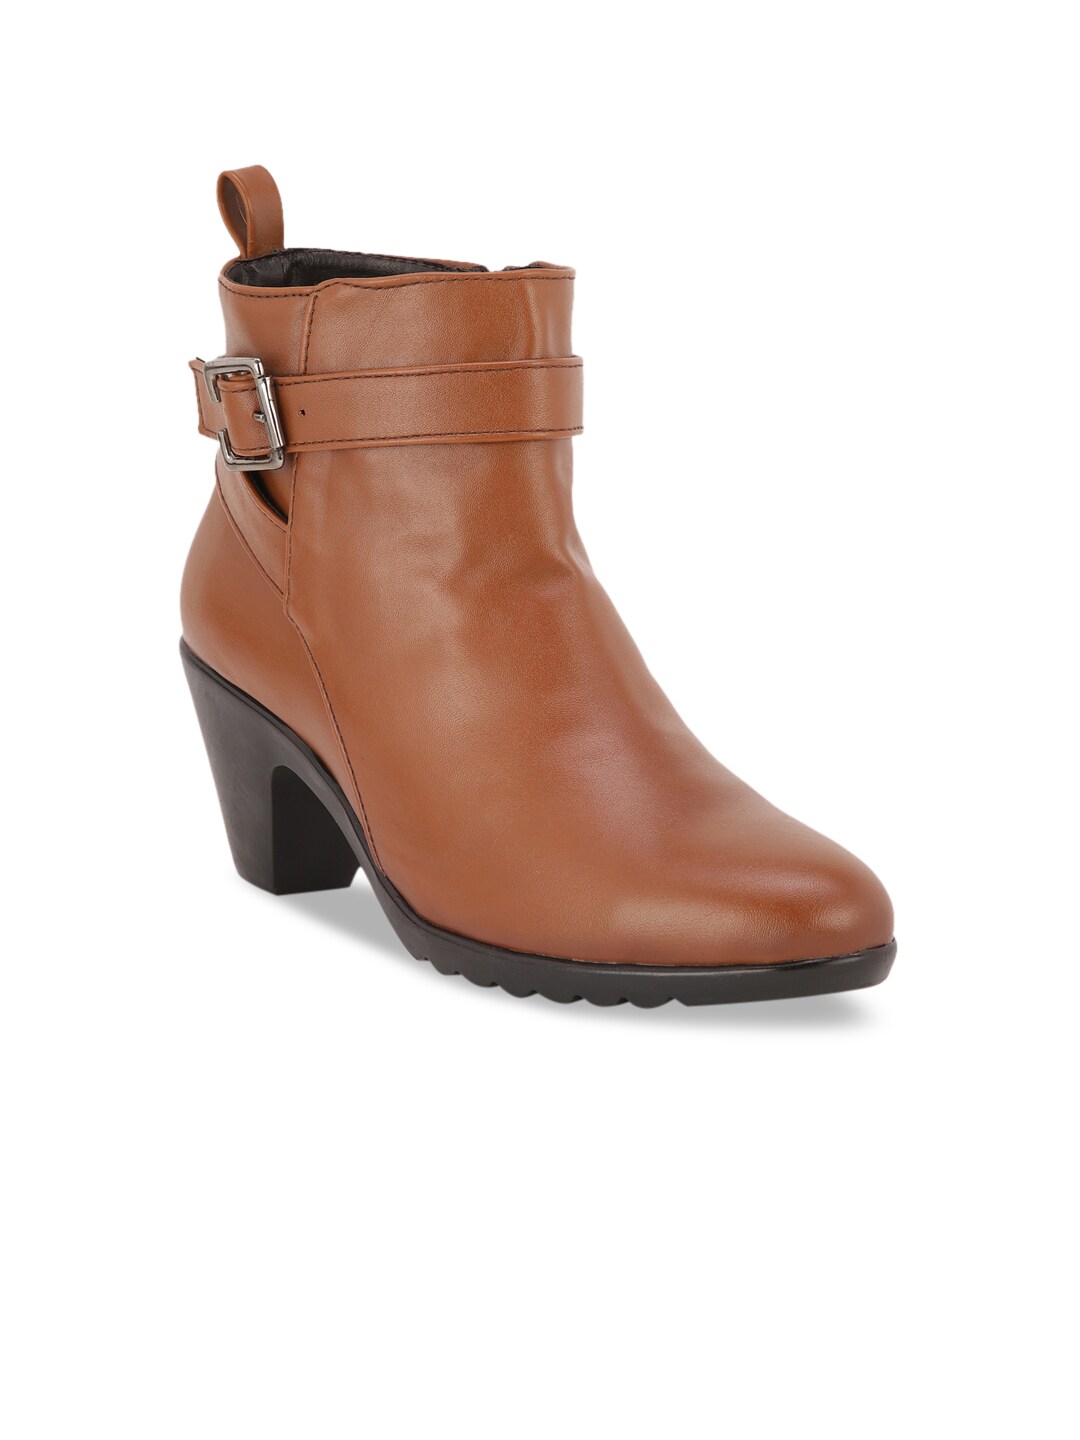 Bruno Manetti Women Tan Brown Solid Heeled Boots Price in India